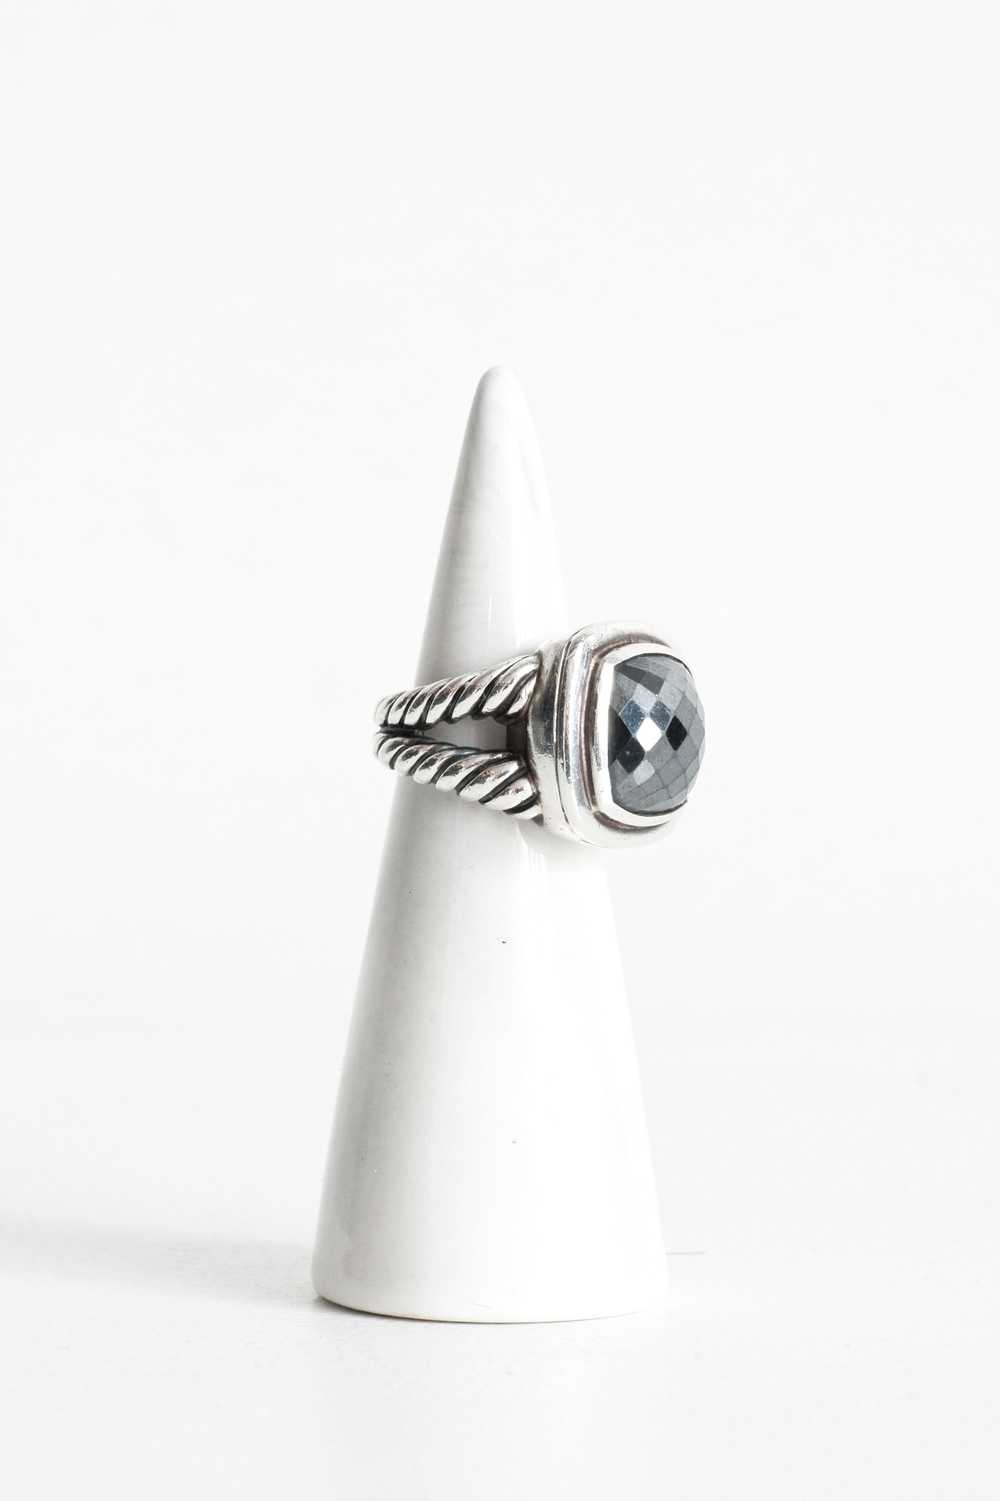 "Albion Ring" with Square-Cut Faceted Stone - image 2